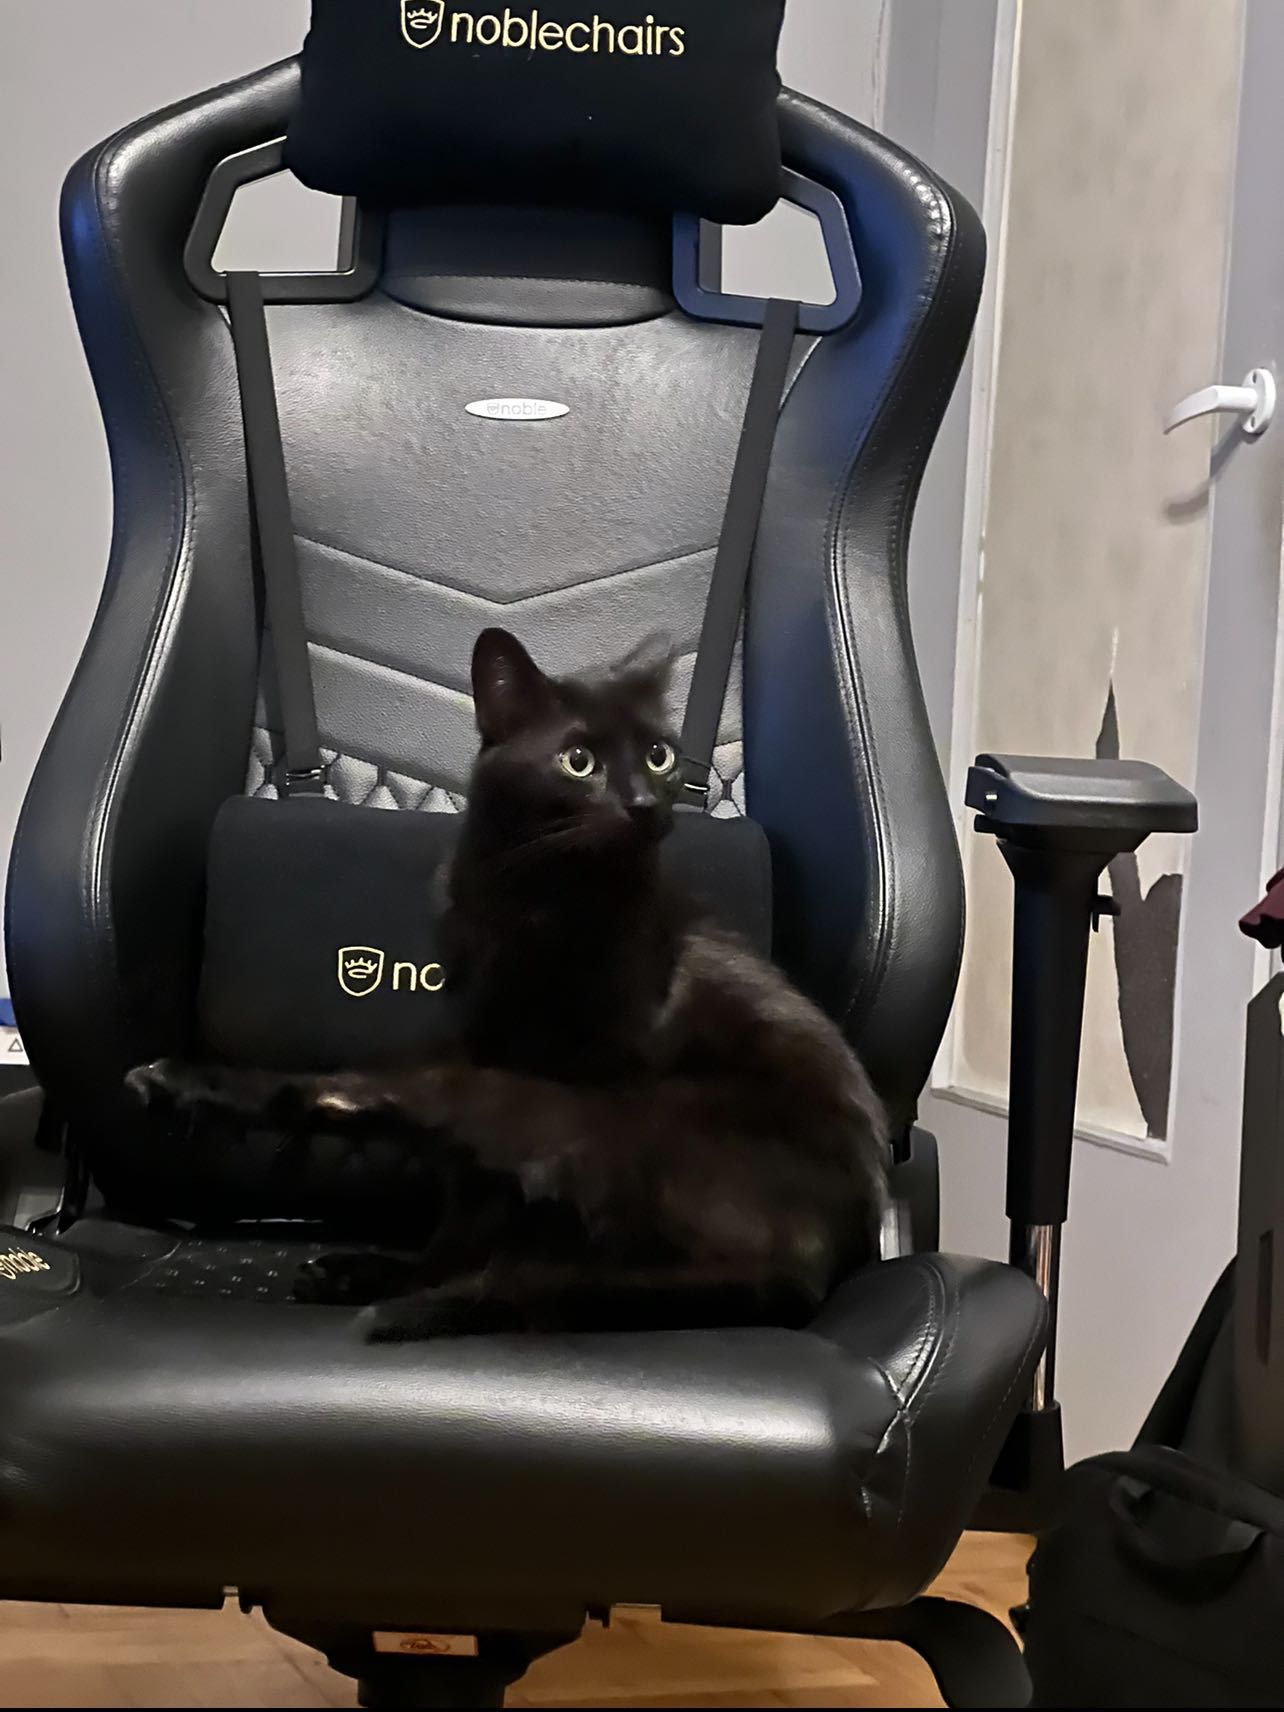 Fotel Gamingowy Noblechairs Epic skóra naturalna